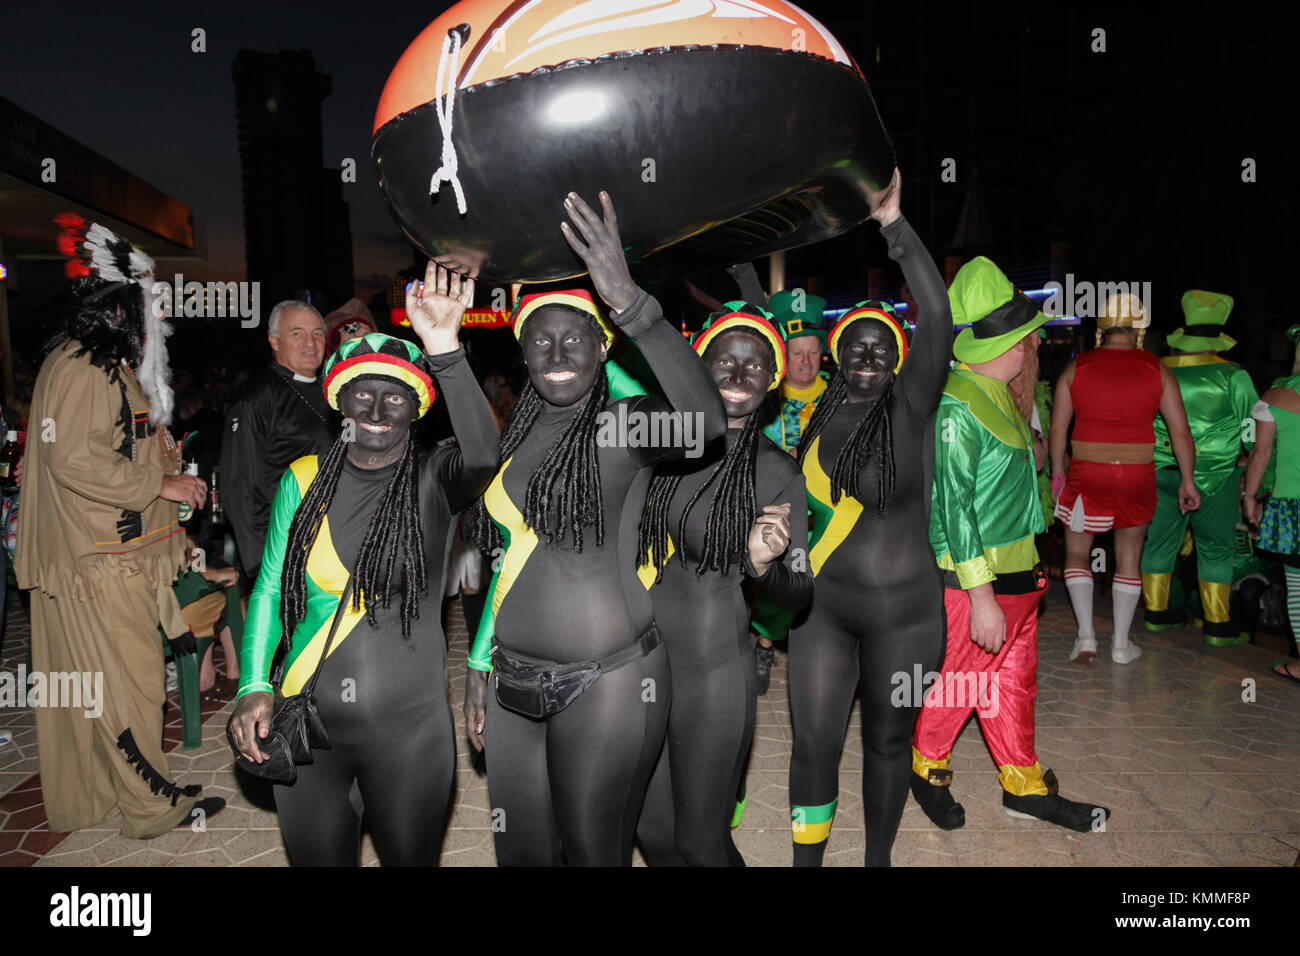 Benidorm new town British fancy dress day group of women dressed as jamaican bobsleigh team Stock Photo